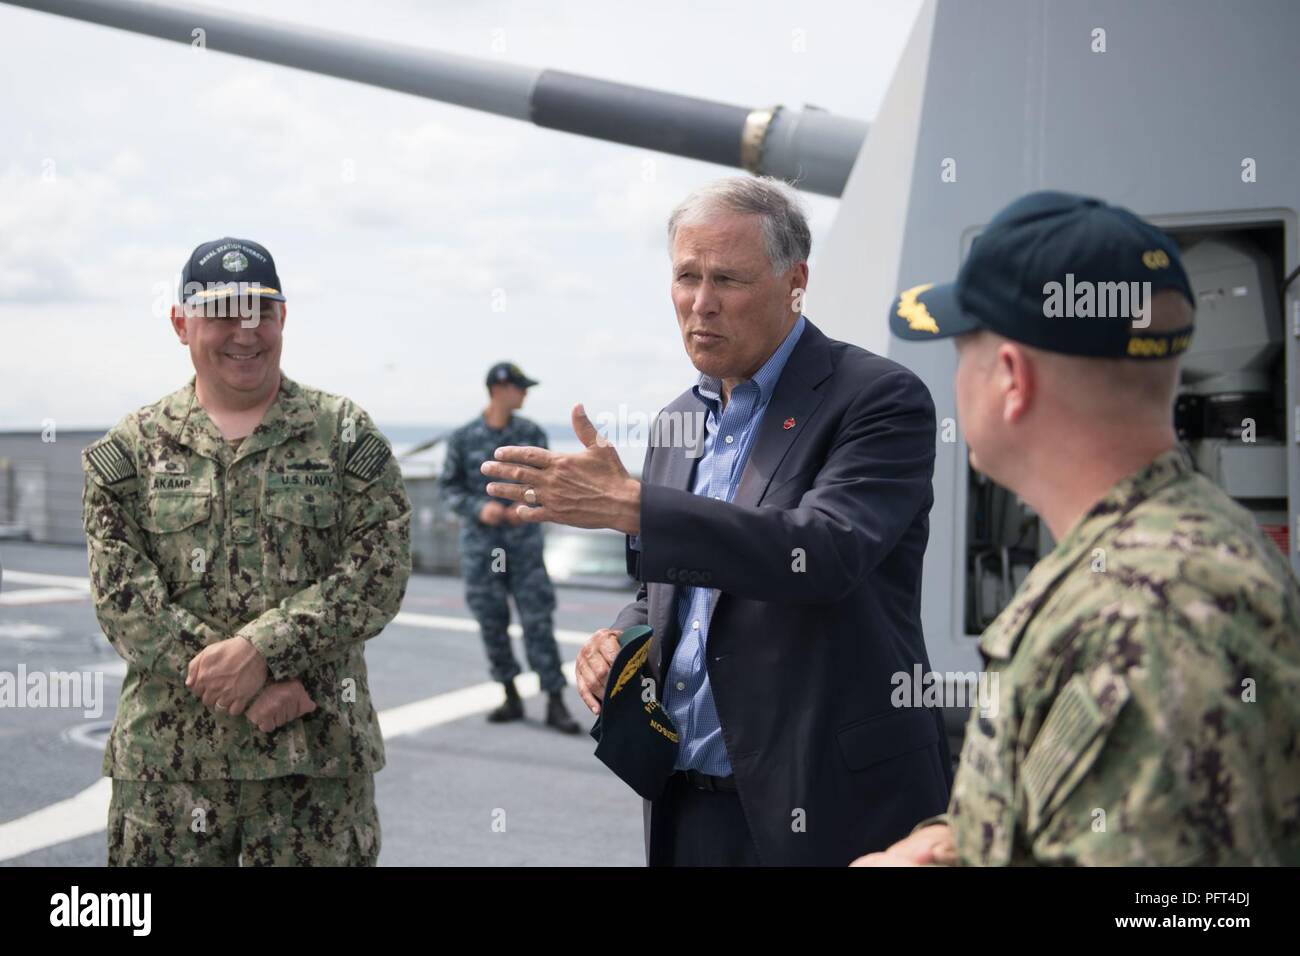 Everett, Wash. (May 31, 2018) Washington State Governor Jay Inslee tours the Arleigh Burke-class guided-missile destroyer USS Ralph Johnson (DDG 114) with Capt. Mark Lakamp, commanding officer, Naval Station Everett (NSE), and Cmdr. Jason Patterson, Ralph Johnson's commanding officer. Ralph Johnson is the sixth and most recent destroyer to be home-ported at NSE. Stock Photo